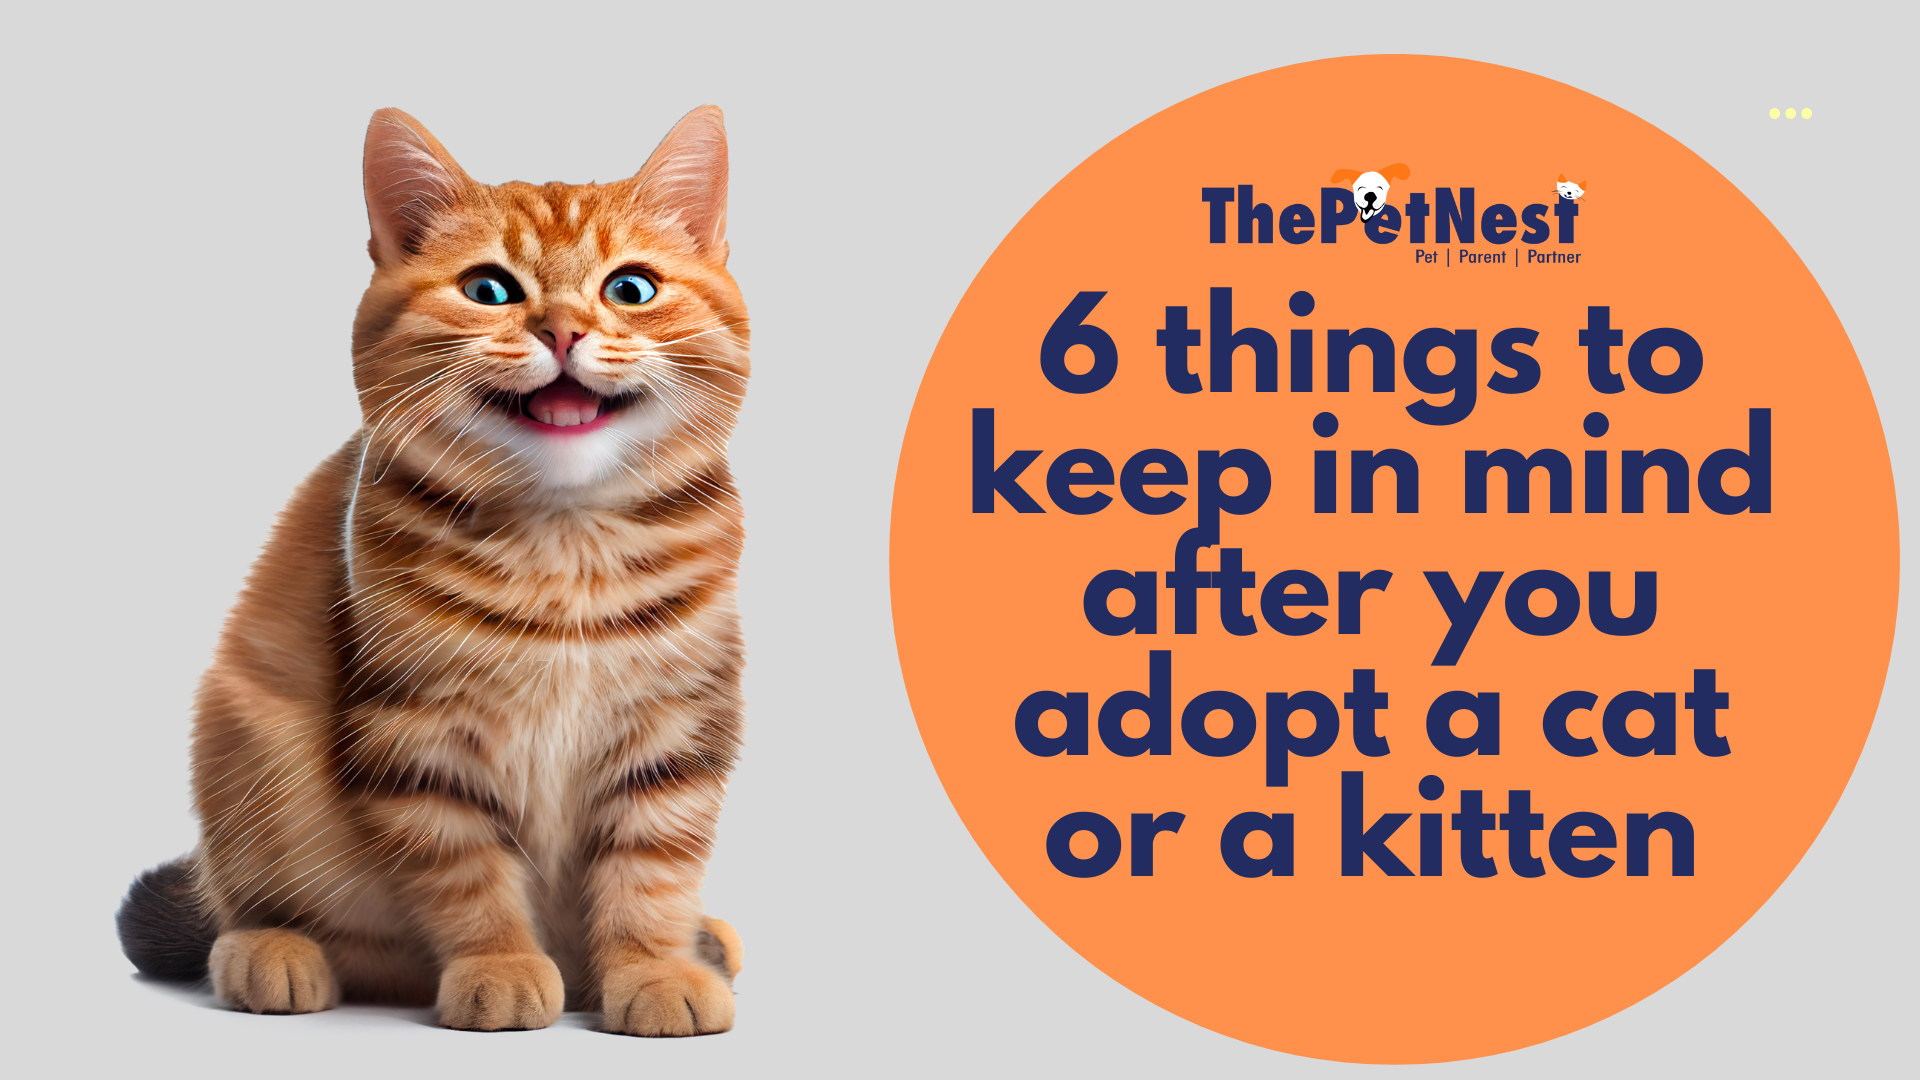 6 things to keep in mind after you adopt a cat or a kitten